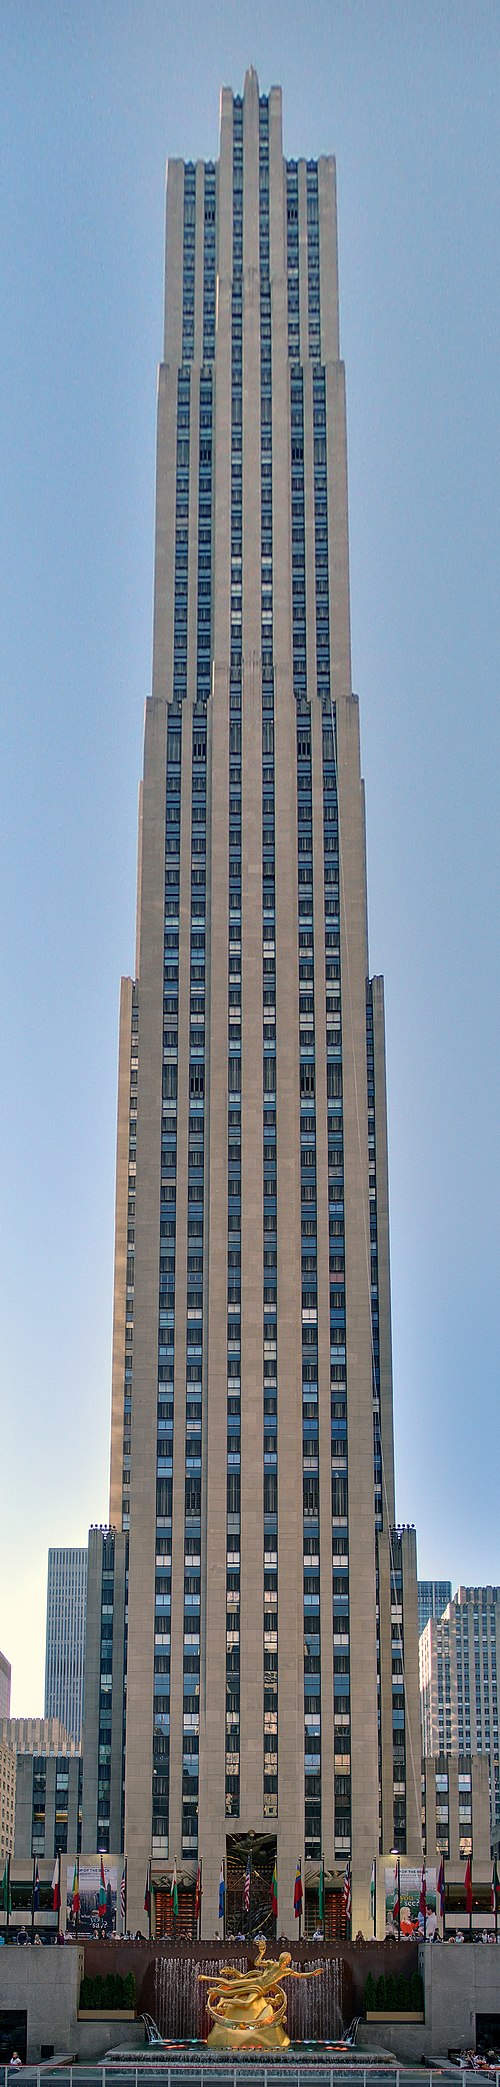 Comcast Building (30 Rockefeller Plaza, or "30 Rock") from which the show is broadcast